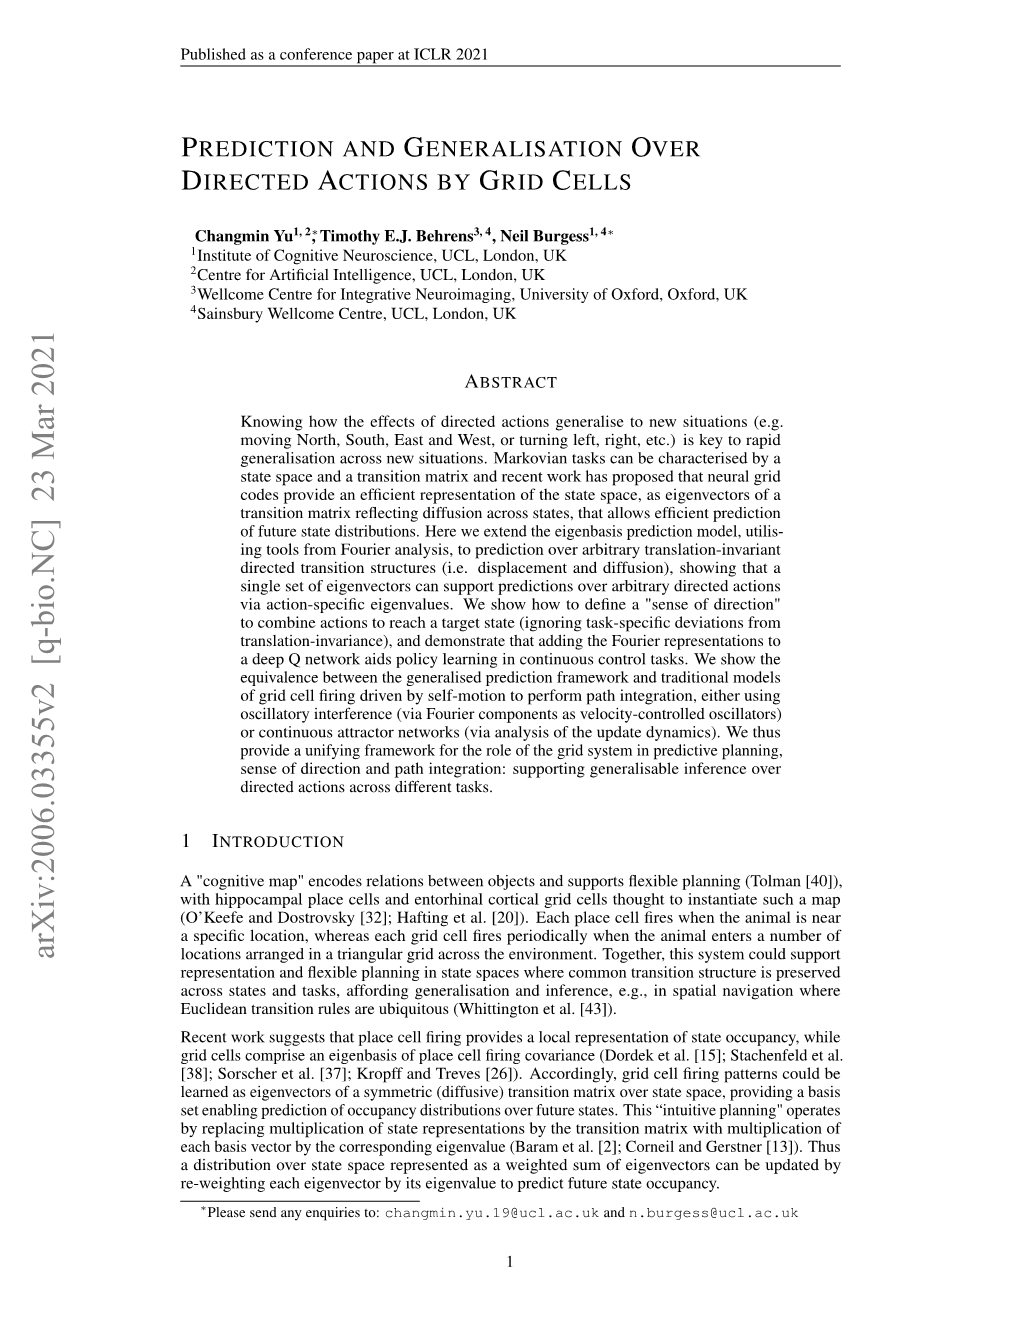 Prediction and Generalisation Over Directed Actions by Grid Cells